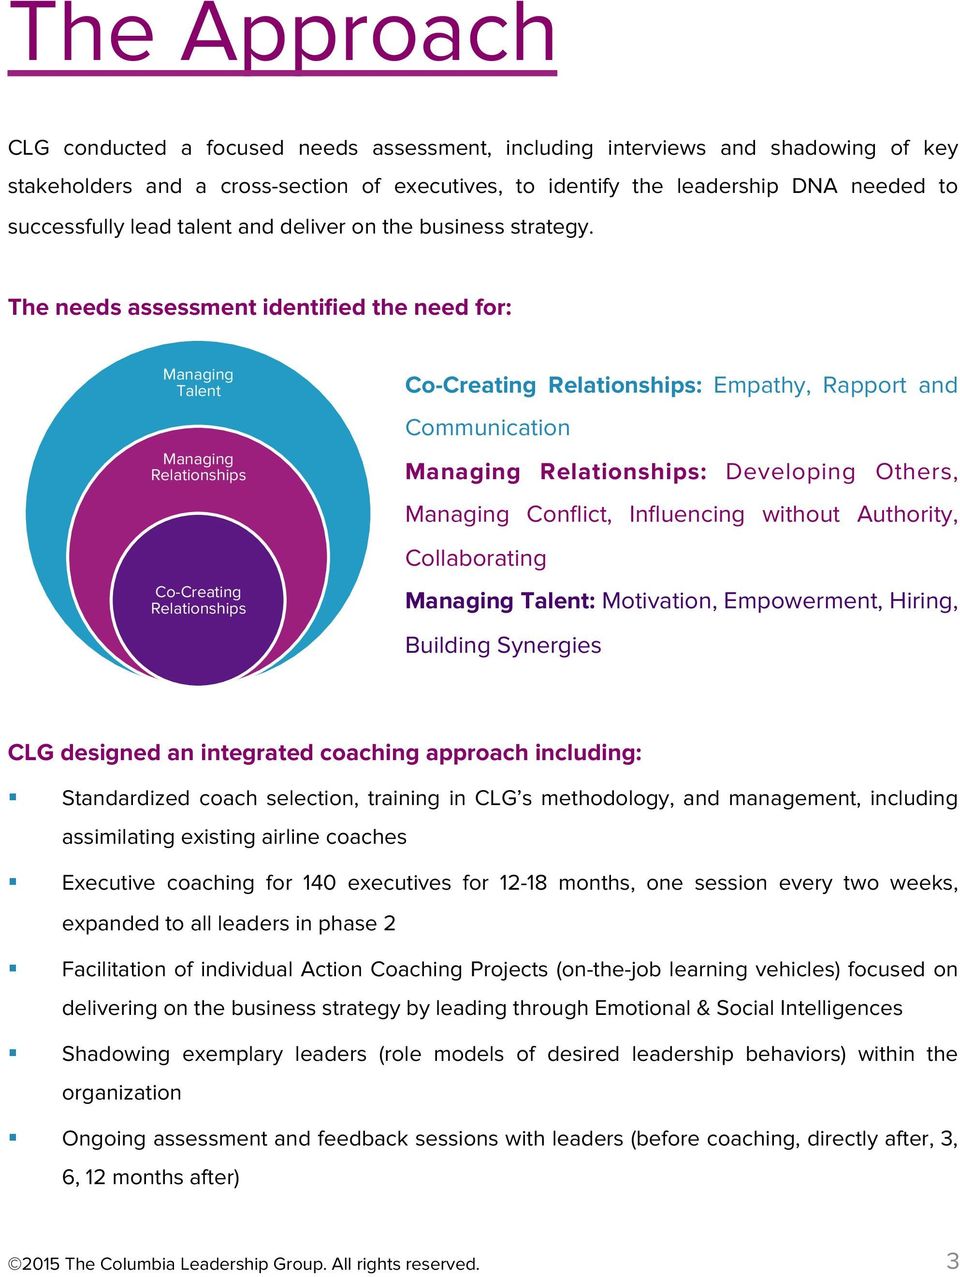 The needs assessment identified the need for: Managing Talent Managing Relationships Co-Creating Relationships Co-Creating Relationships: Empathy, Rapport and Communication Managing Relationships: